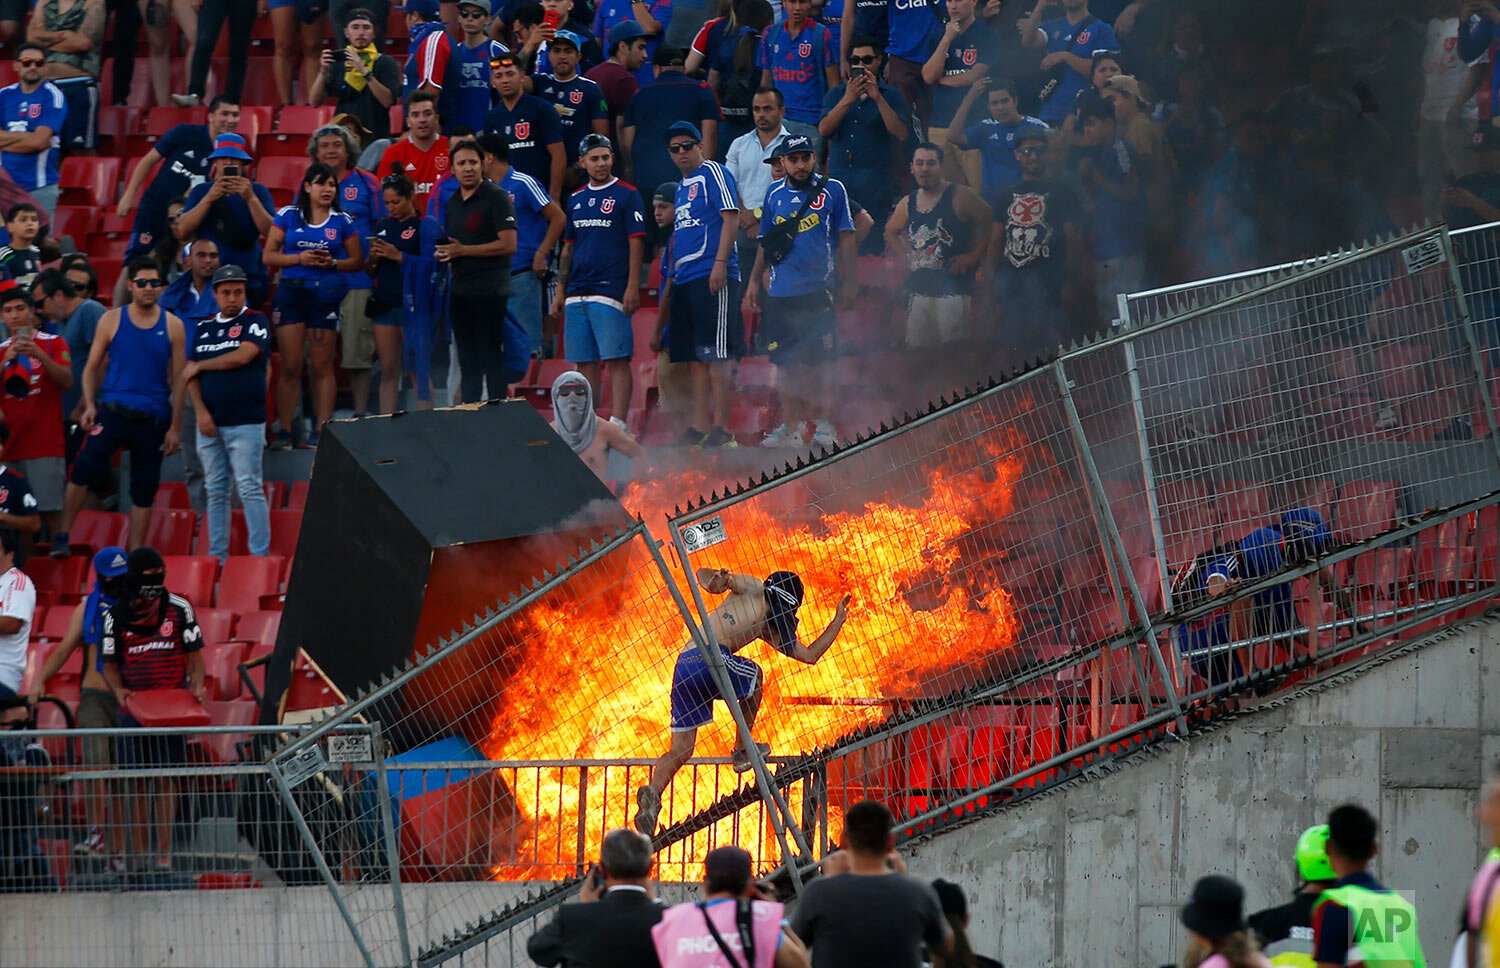  A small group of anti-government protesters set a section of the stadium on fire during the Copa Libertadores soccer game between Universidad de Chile and Brazil's SC Internacional, in Santiago, Chile, Tuesday, Feb. 4, 2020. (AP Photo/Luis Hidalgo) 